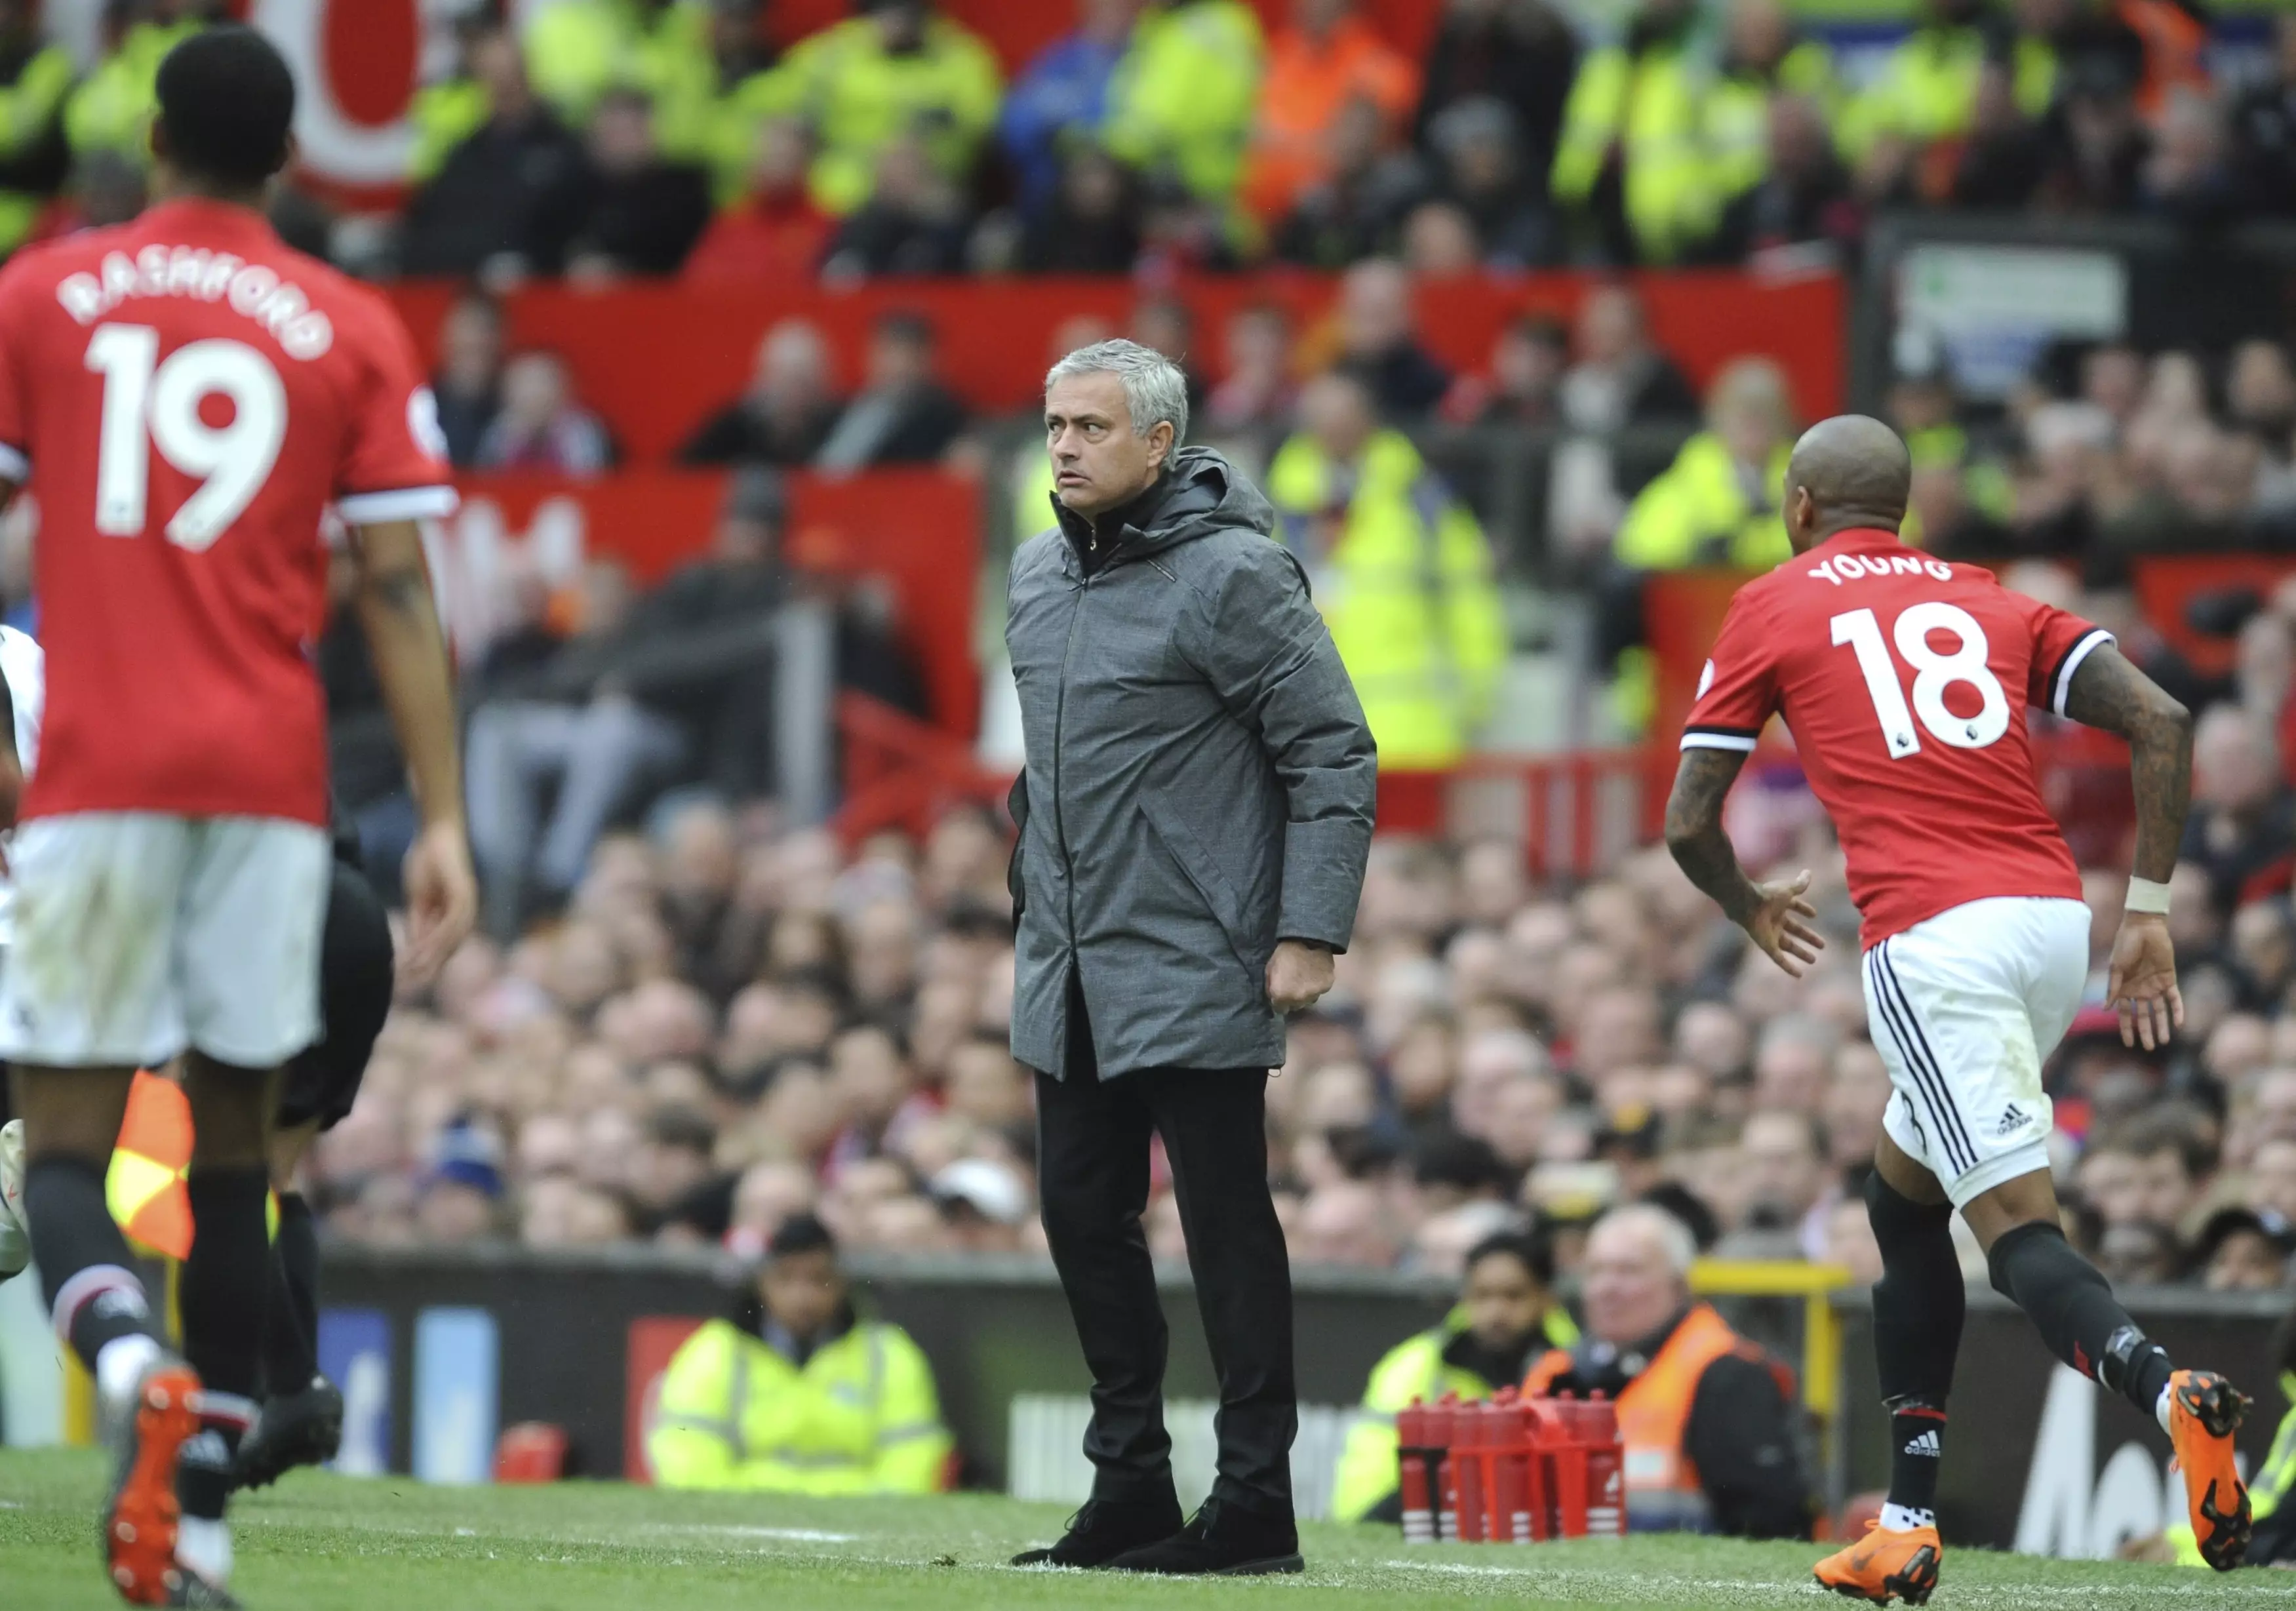 Mourinho watches on from the sideline. Image: PA